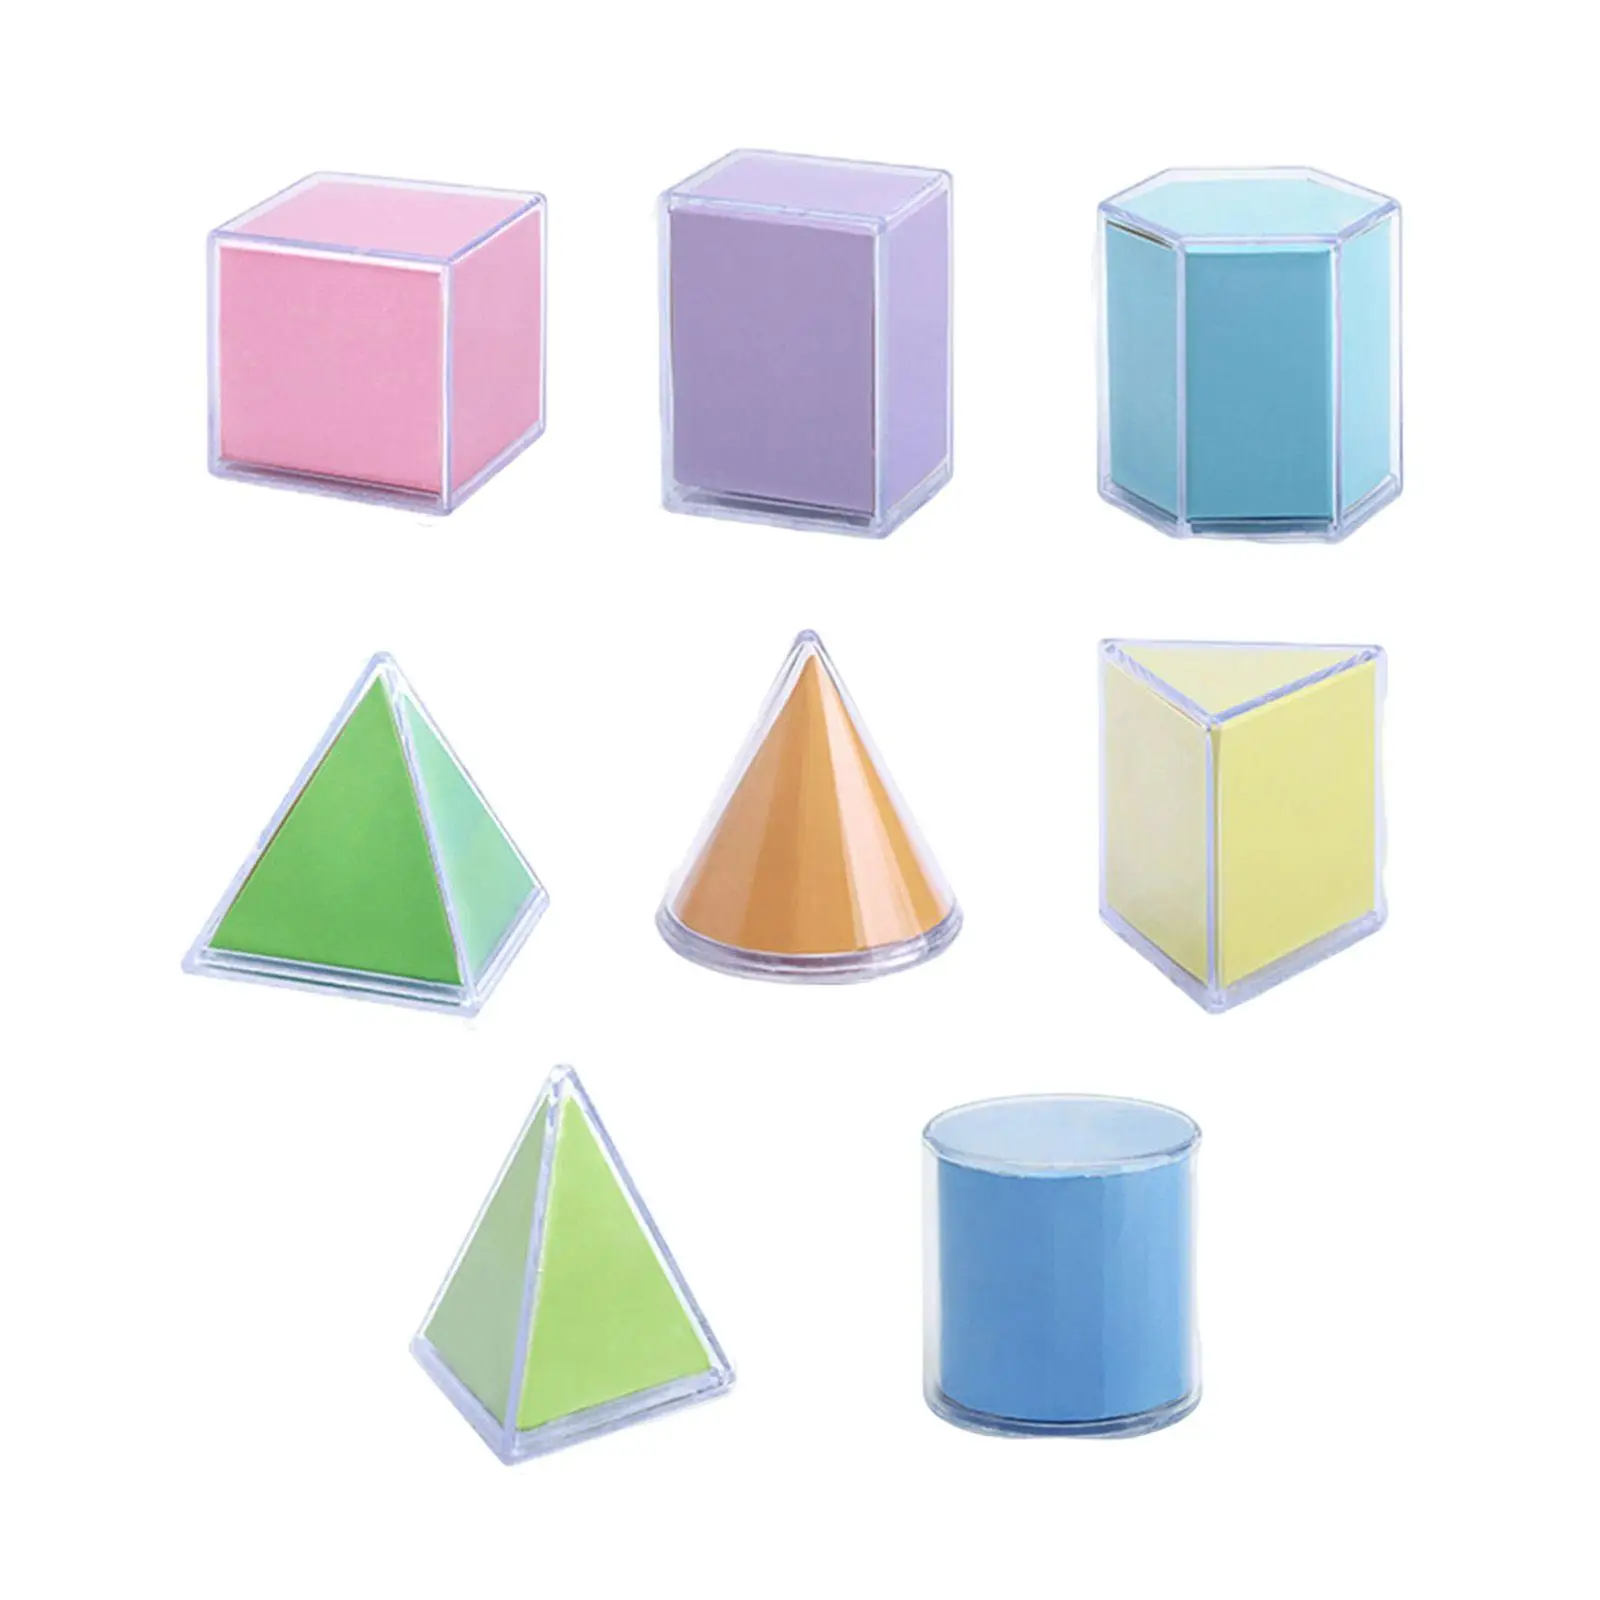 8x 3D Shapes Geometric Shape Sorter Sorting Toy Stacking Game for Babies